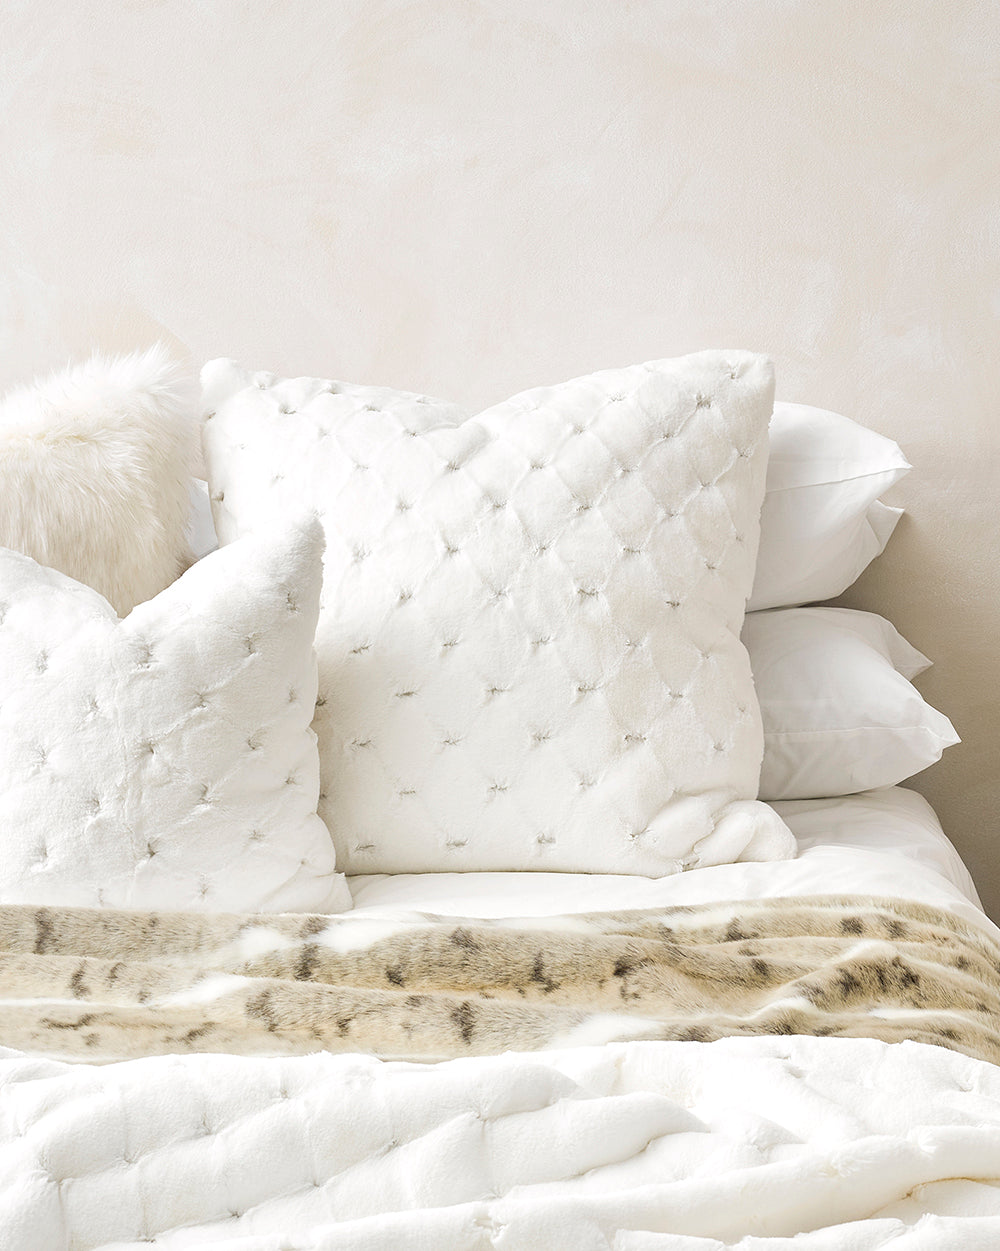 Heirloom Valentina White Throw Rug Blanket in Faux Fur is available from Make Your House A Home Premium Stockist. Furniture Store Bendigo, Victoria. Australia Wide Delivery.